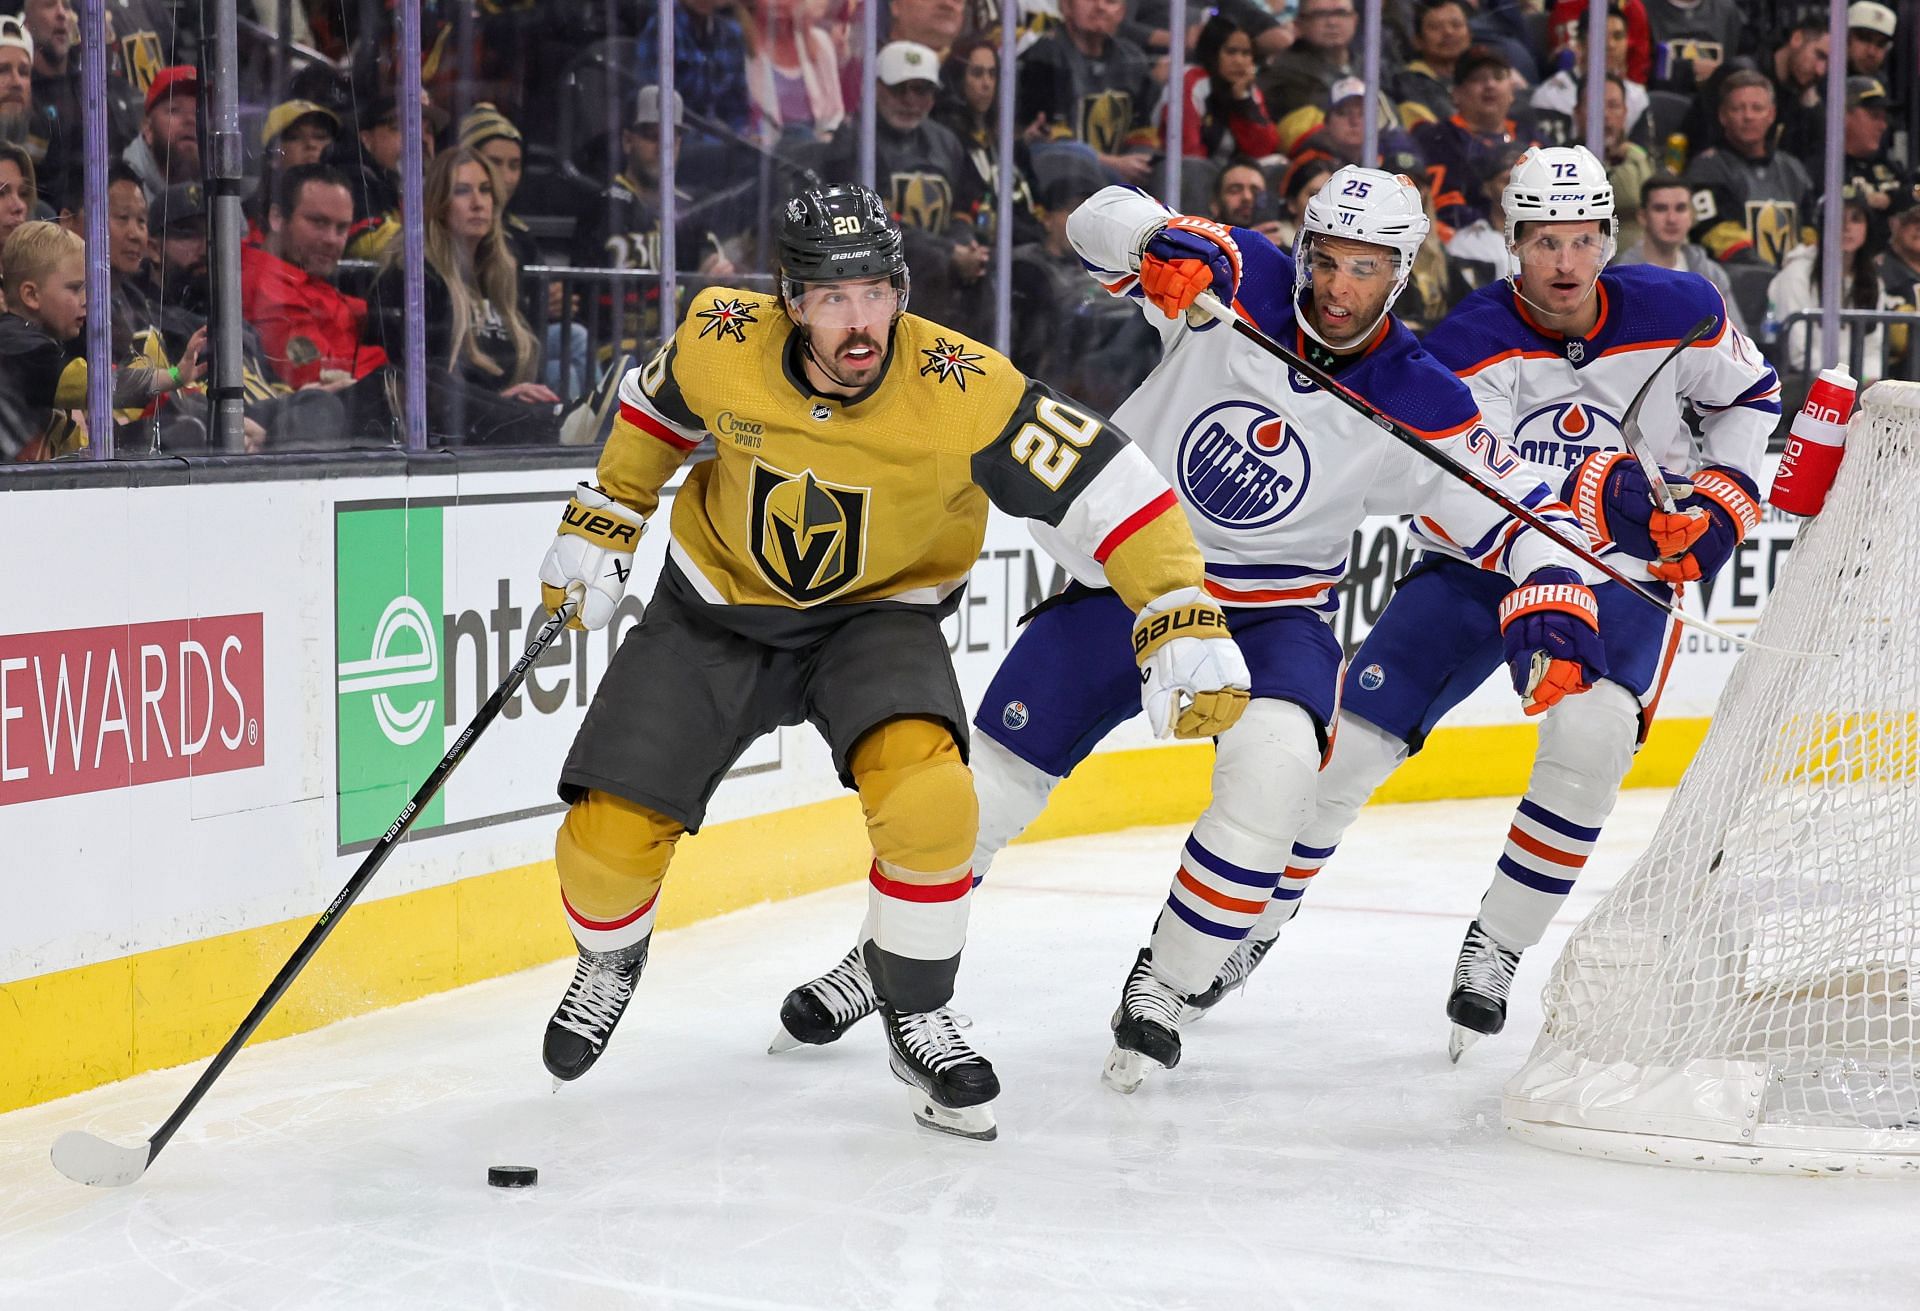 Edmonton Oilers vs Vegas Golden Knights Game 3 How to Watch, TV Channel List, Live Stream details and More